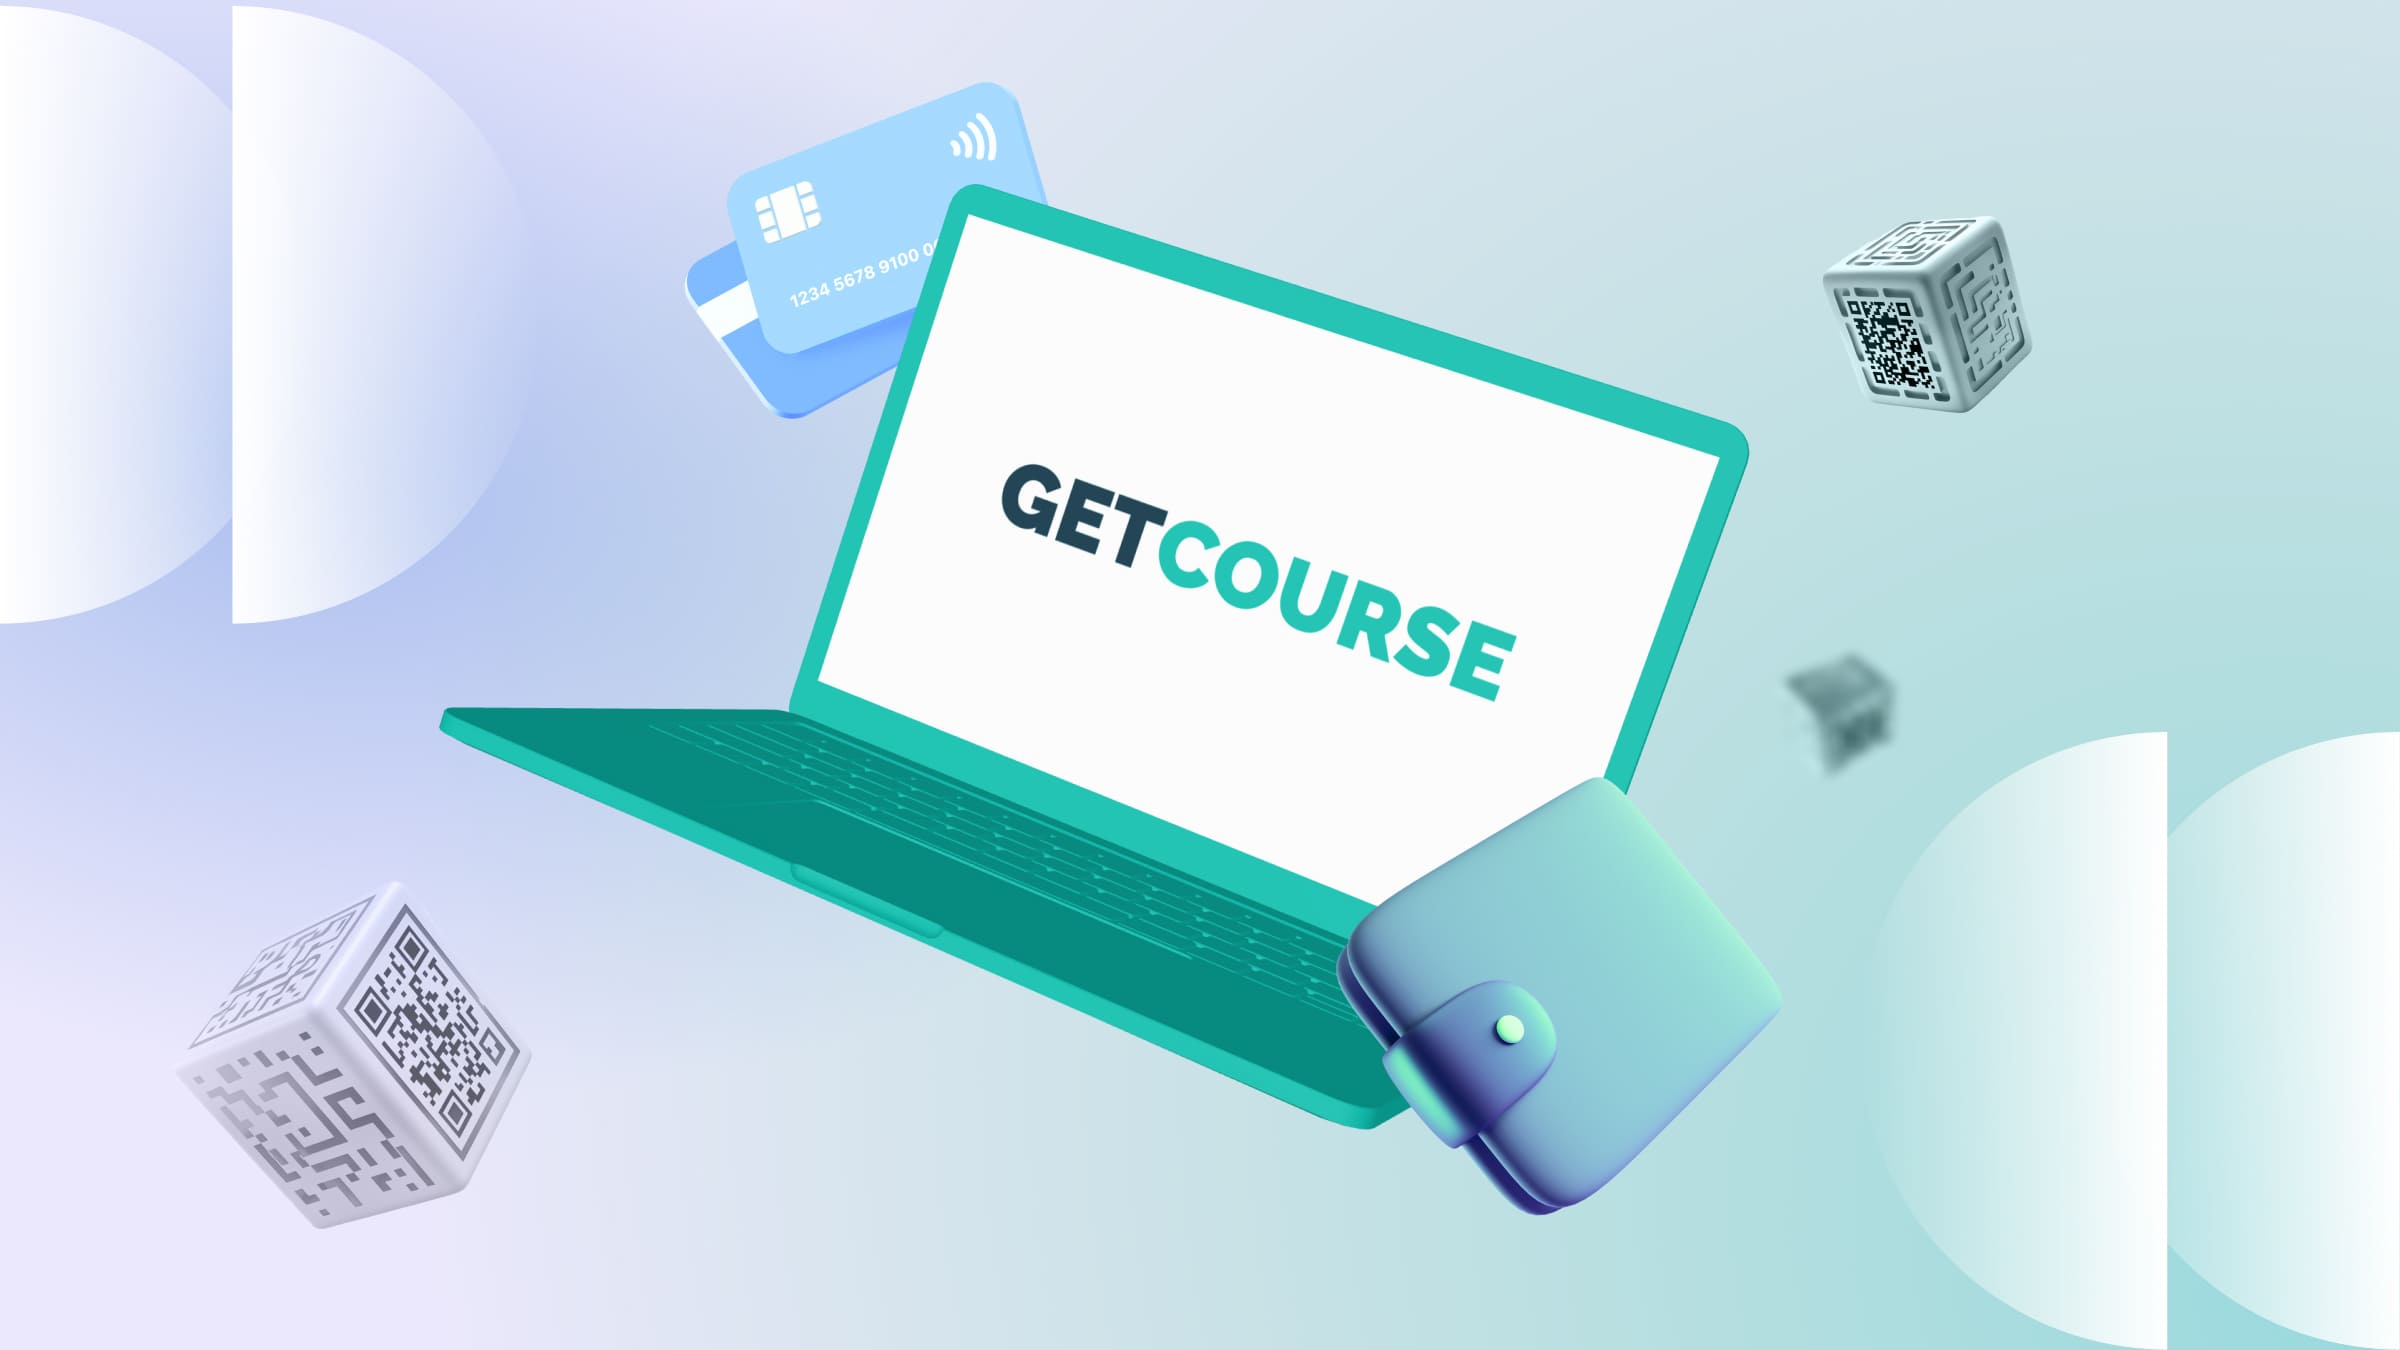 Discover how to accept payment through Getcourse.